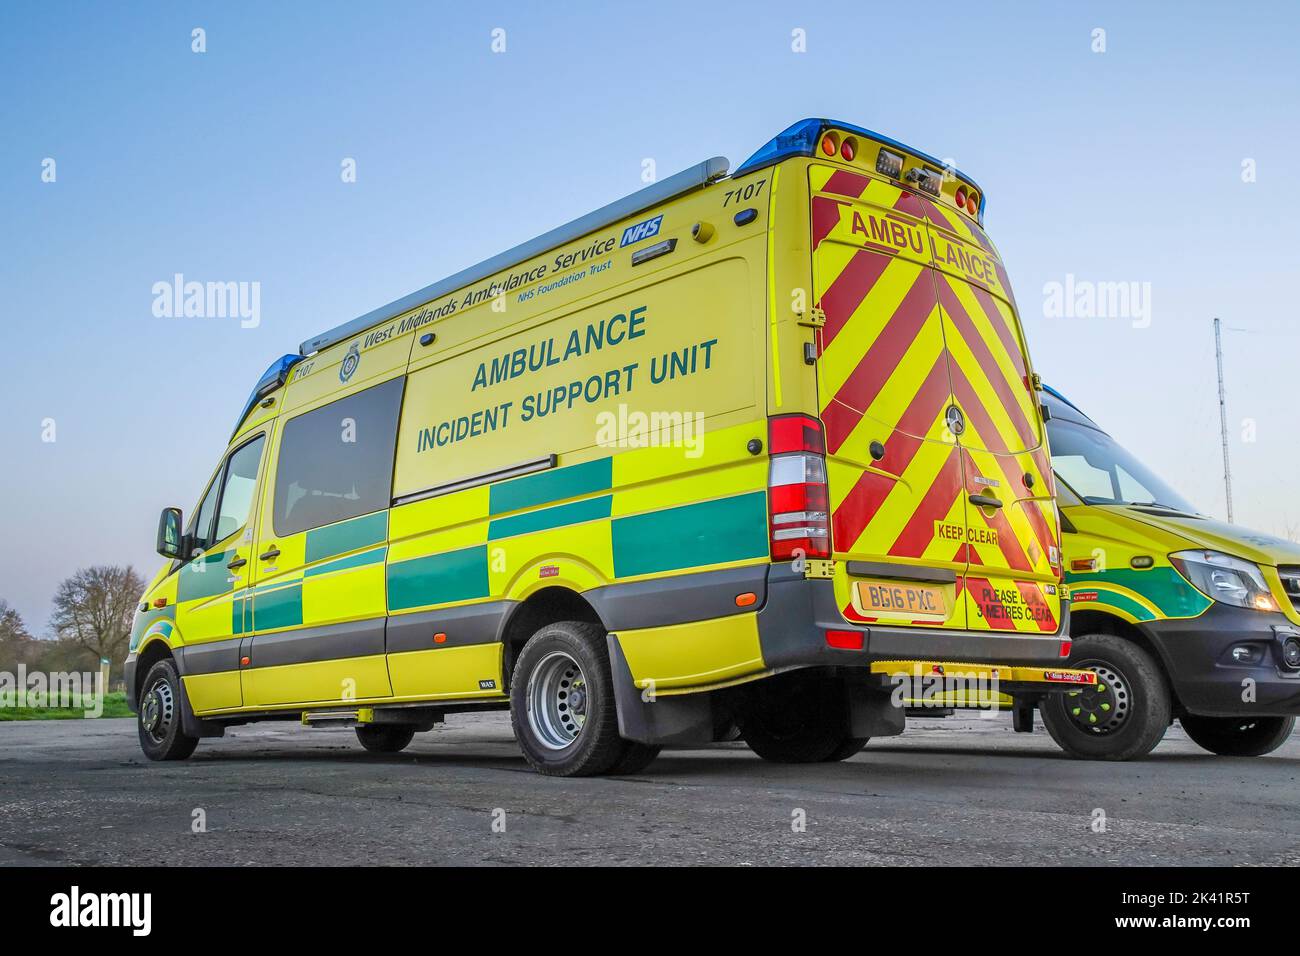 Low angle, side/rear view of a West Midlands Ambulance Incident Support Unit vehicle parked outdoors. Stock Photo